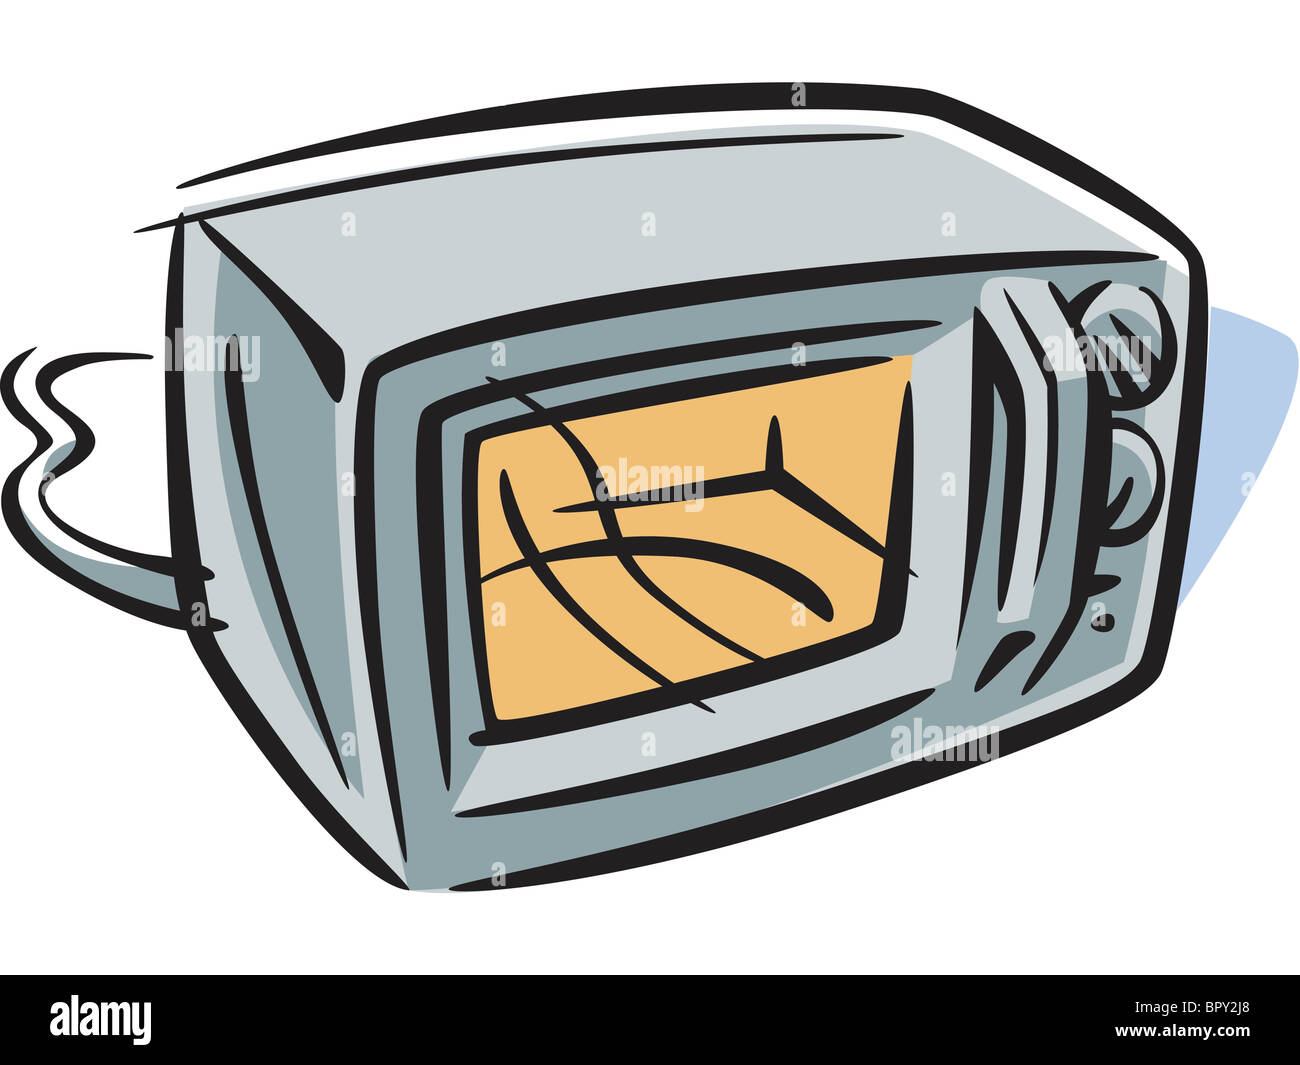 Drawing of a microwave oven Stock Photo, Royalty Free Image 31327584